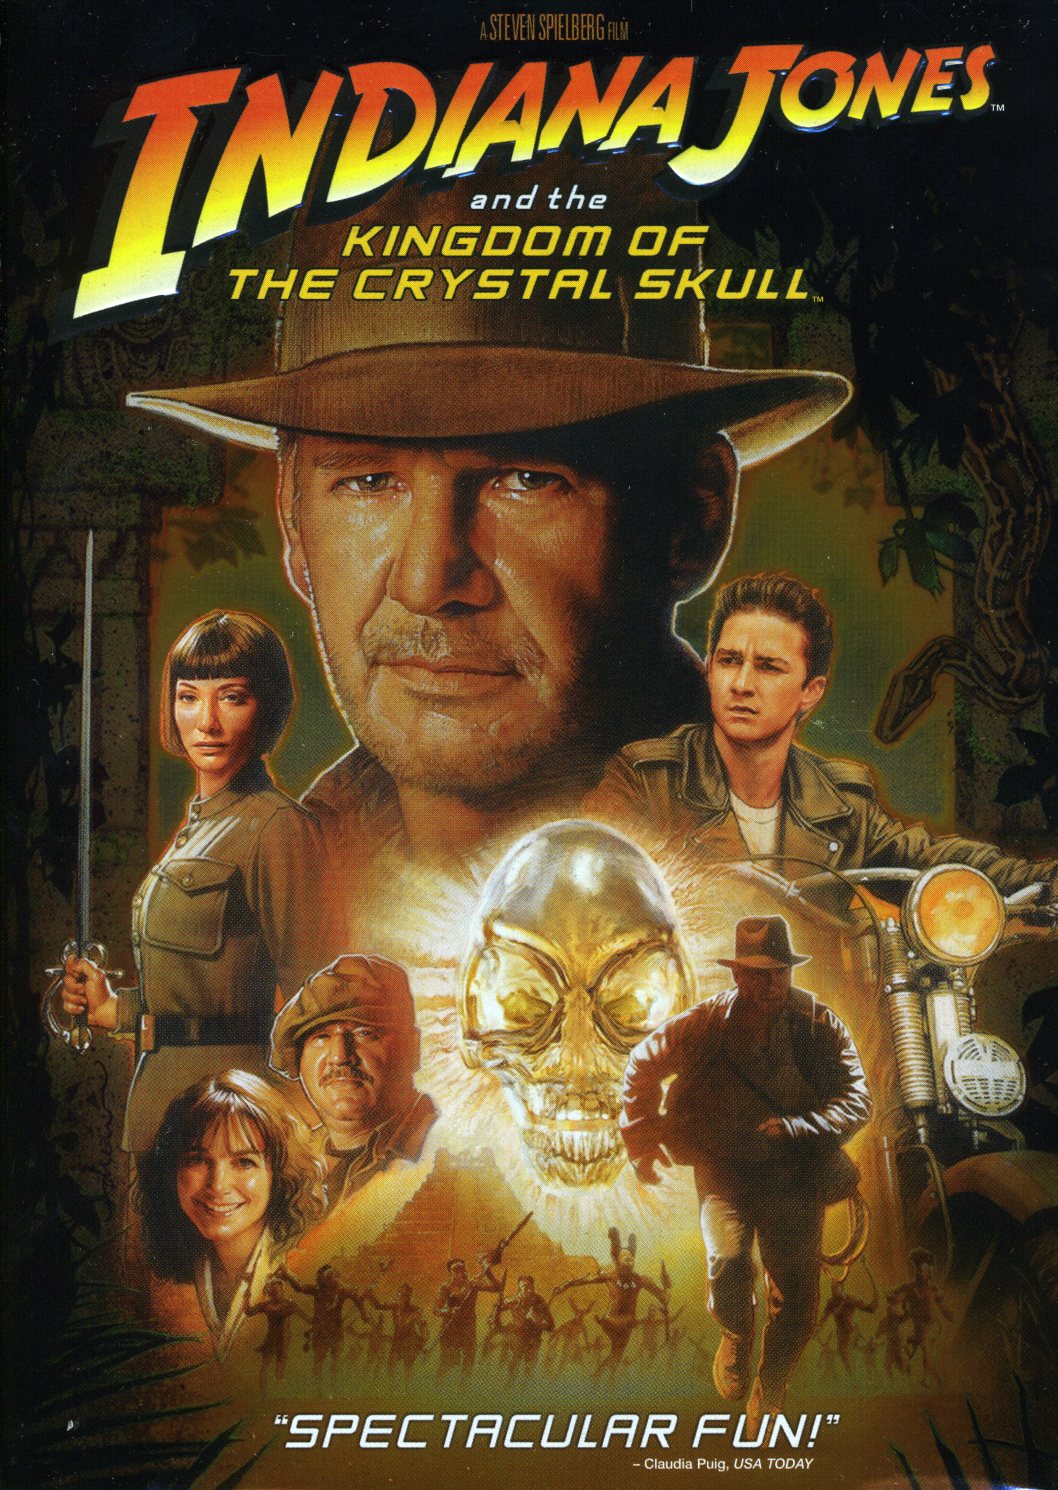 Indiana Jones And The Kingdom Of The Crystal Skull Backgrounds, Compatible - PC, Mobile, Gadgets| 1058x1490 px